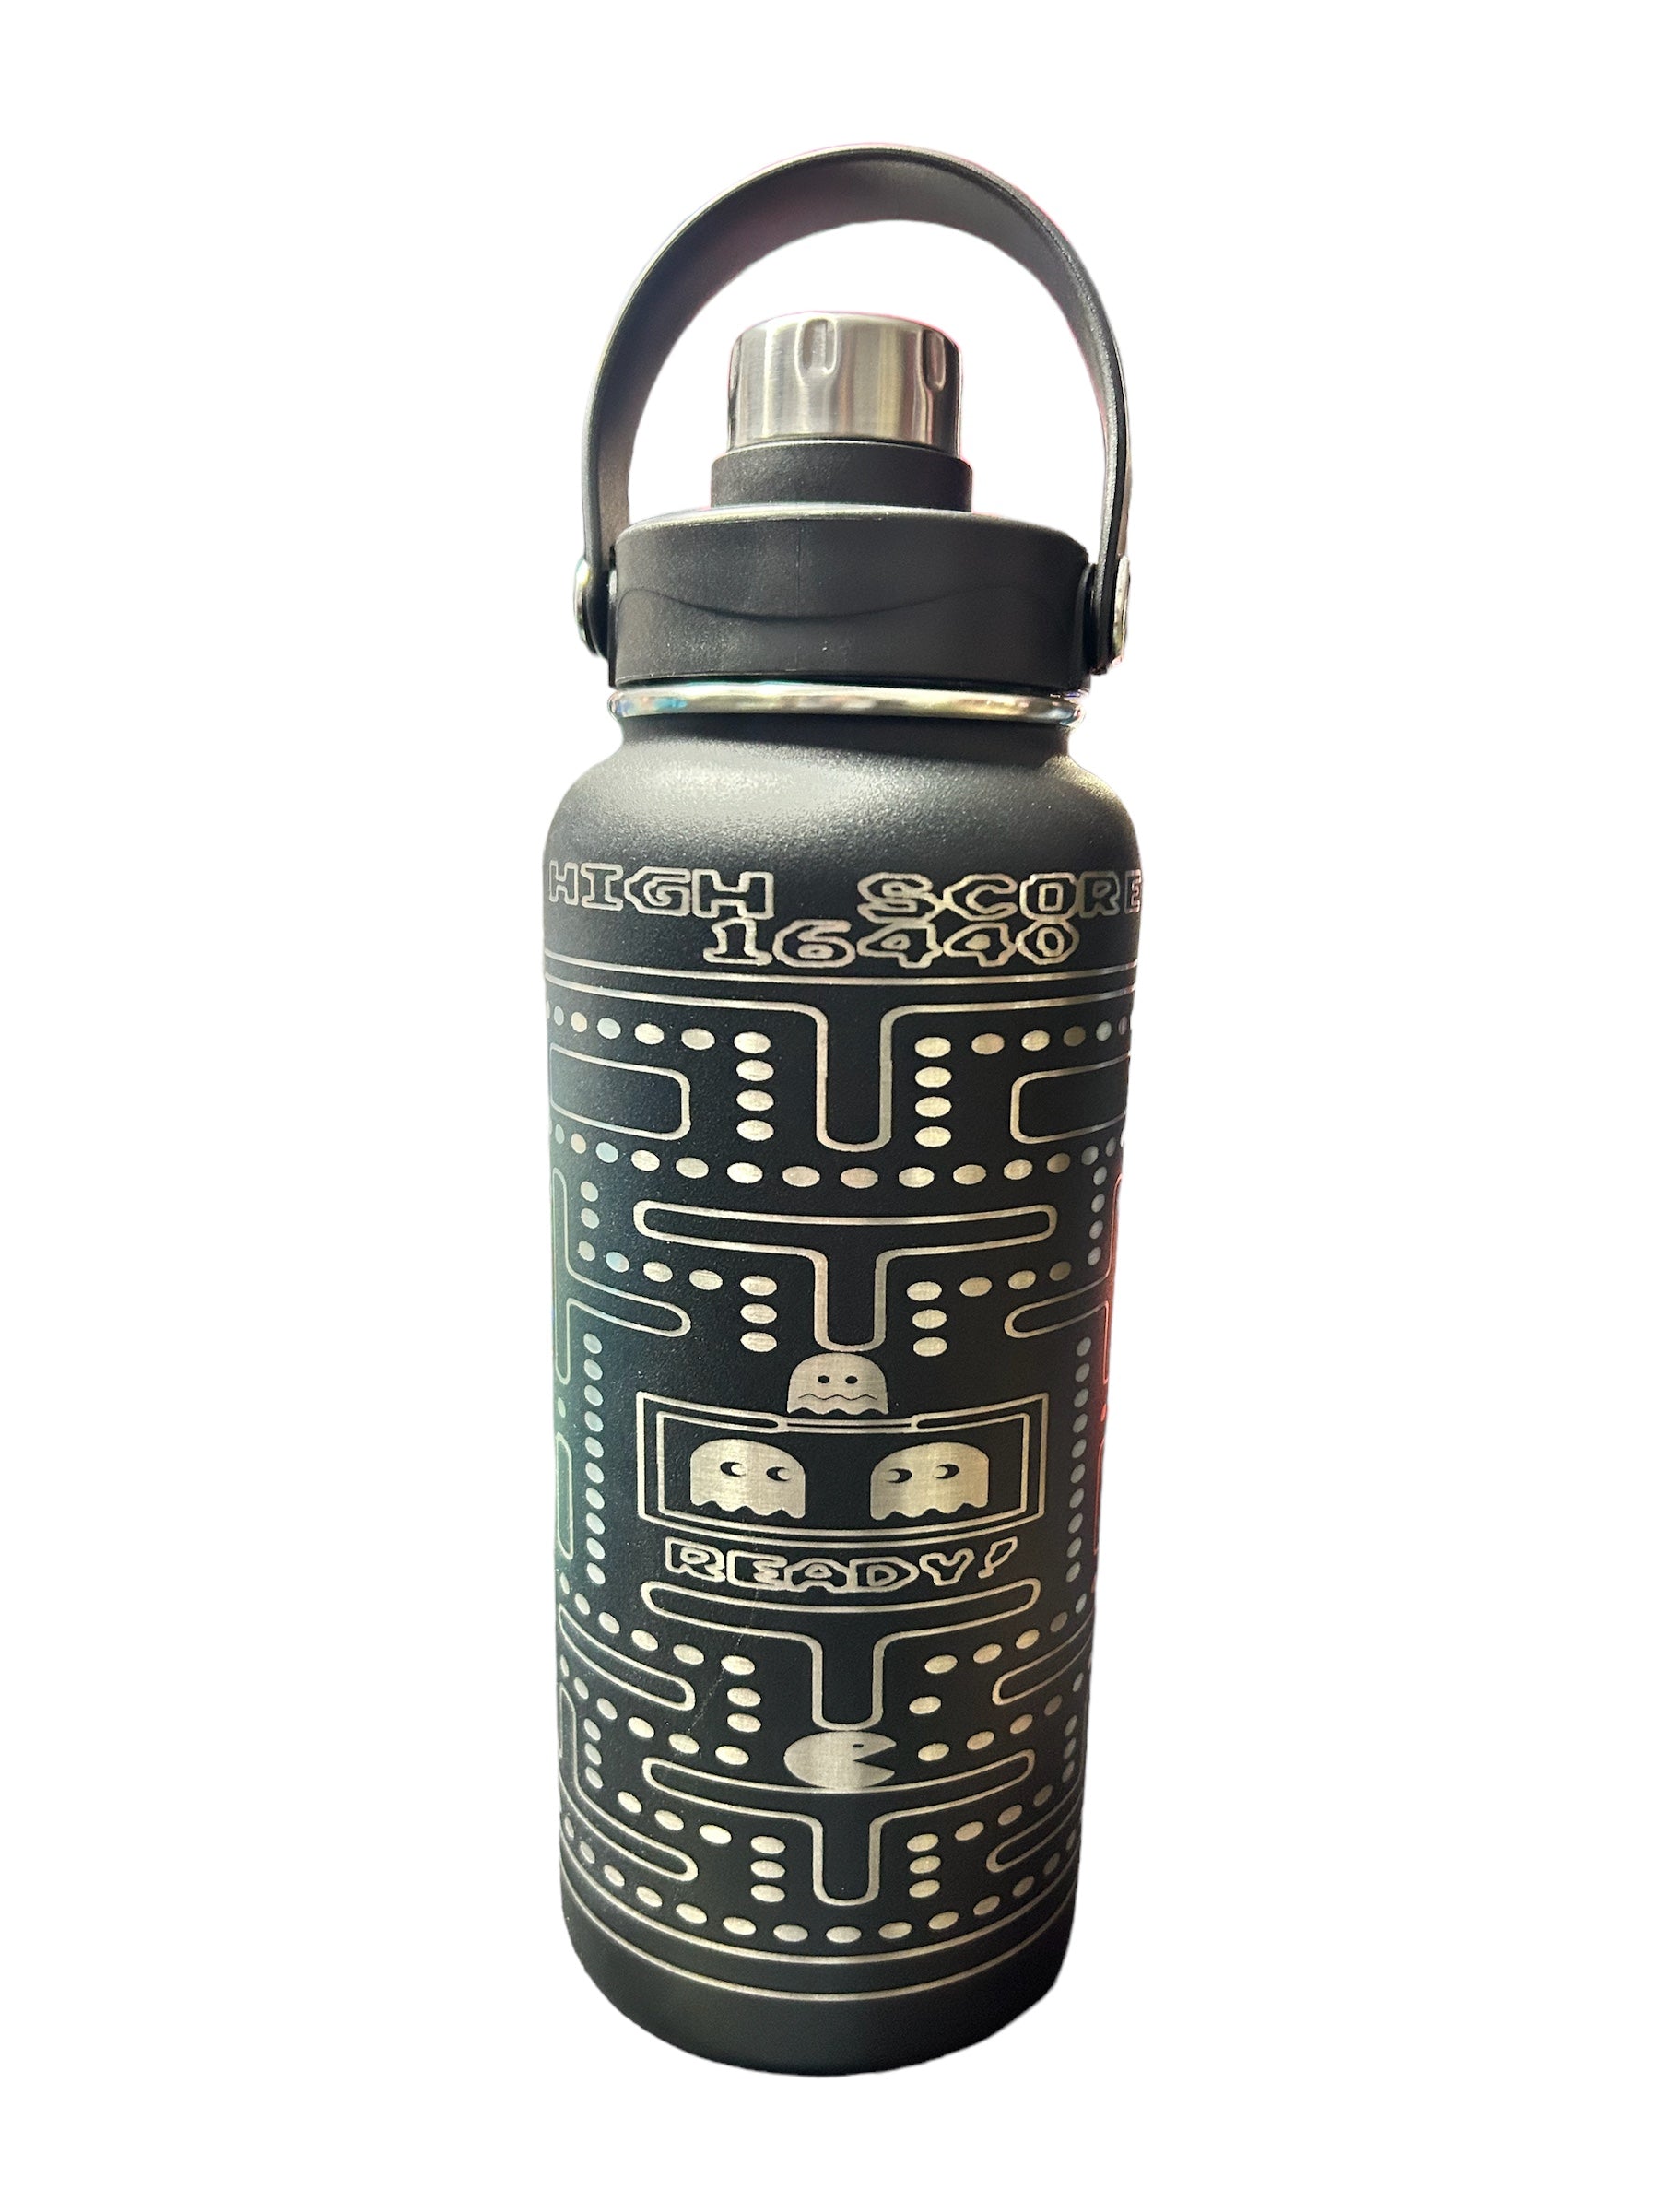 32oz. Pacman insulated Tumbler. Laser Engraved.